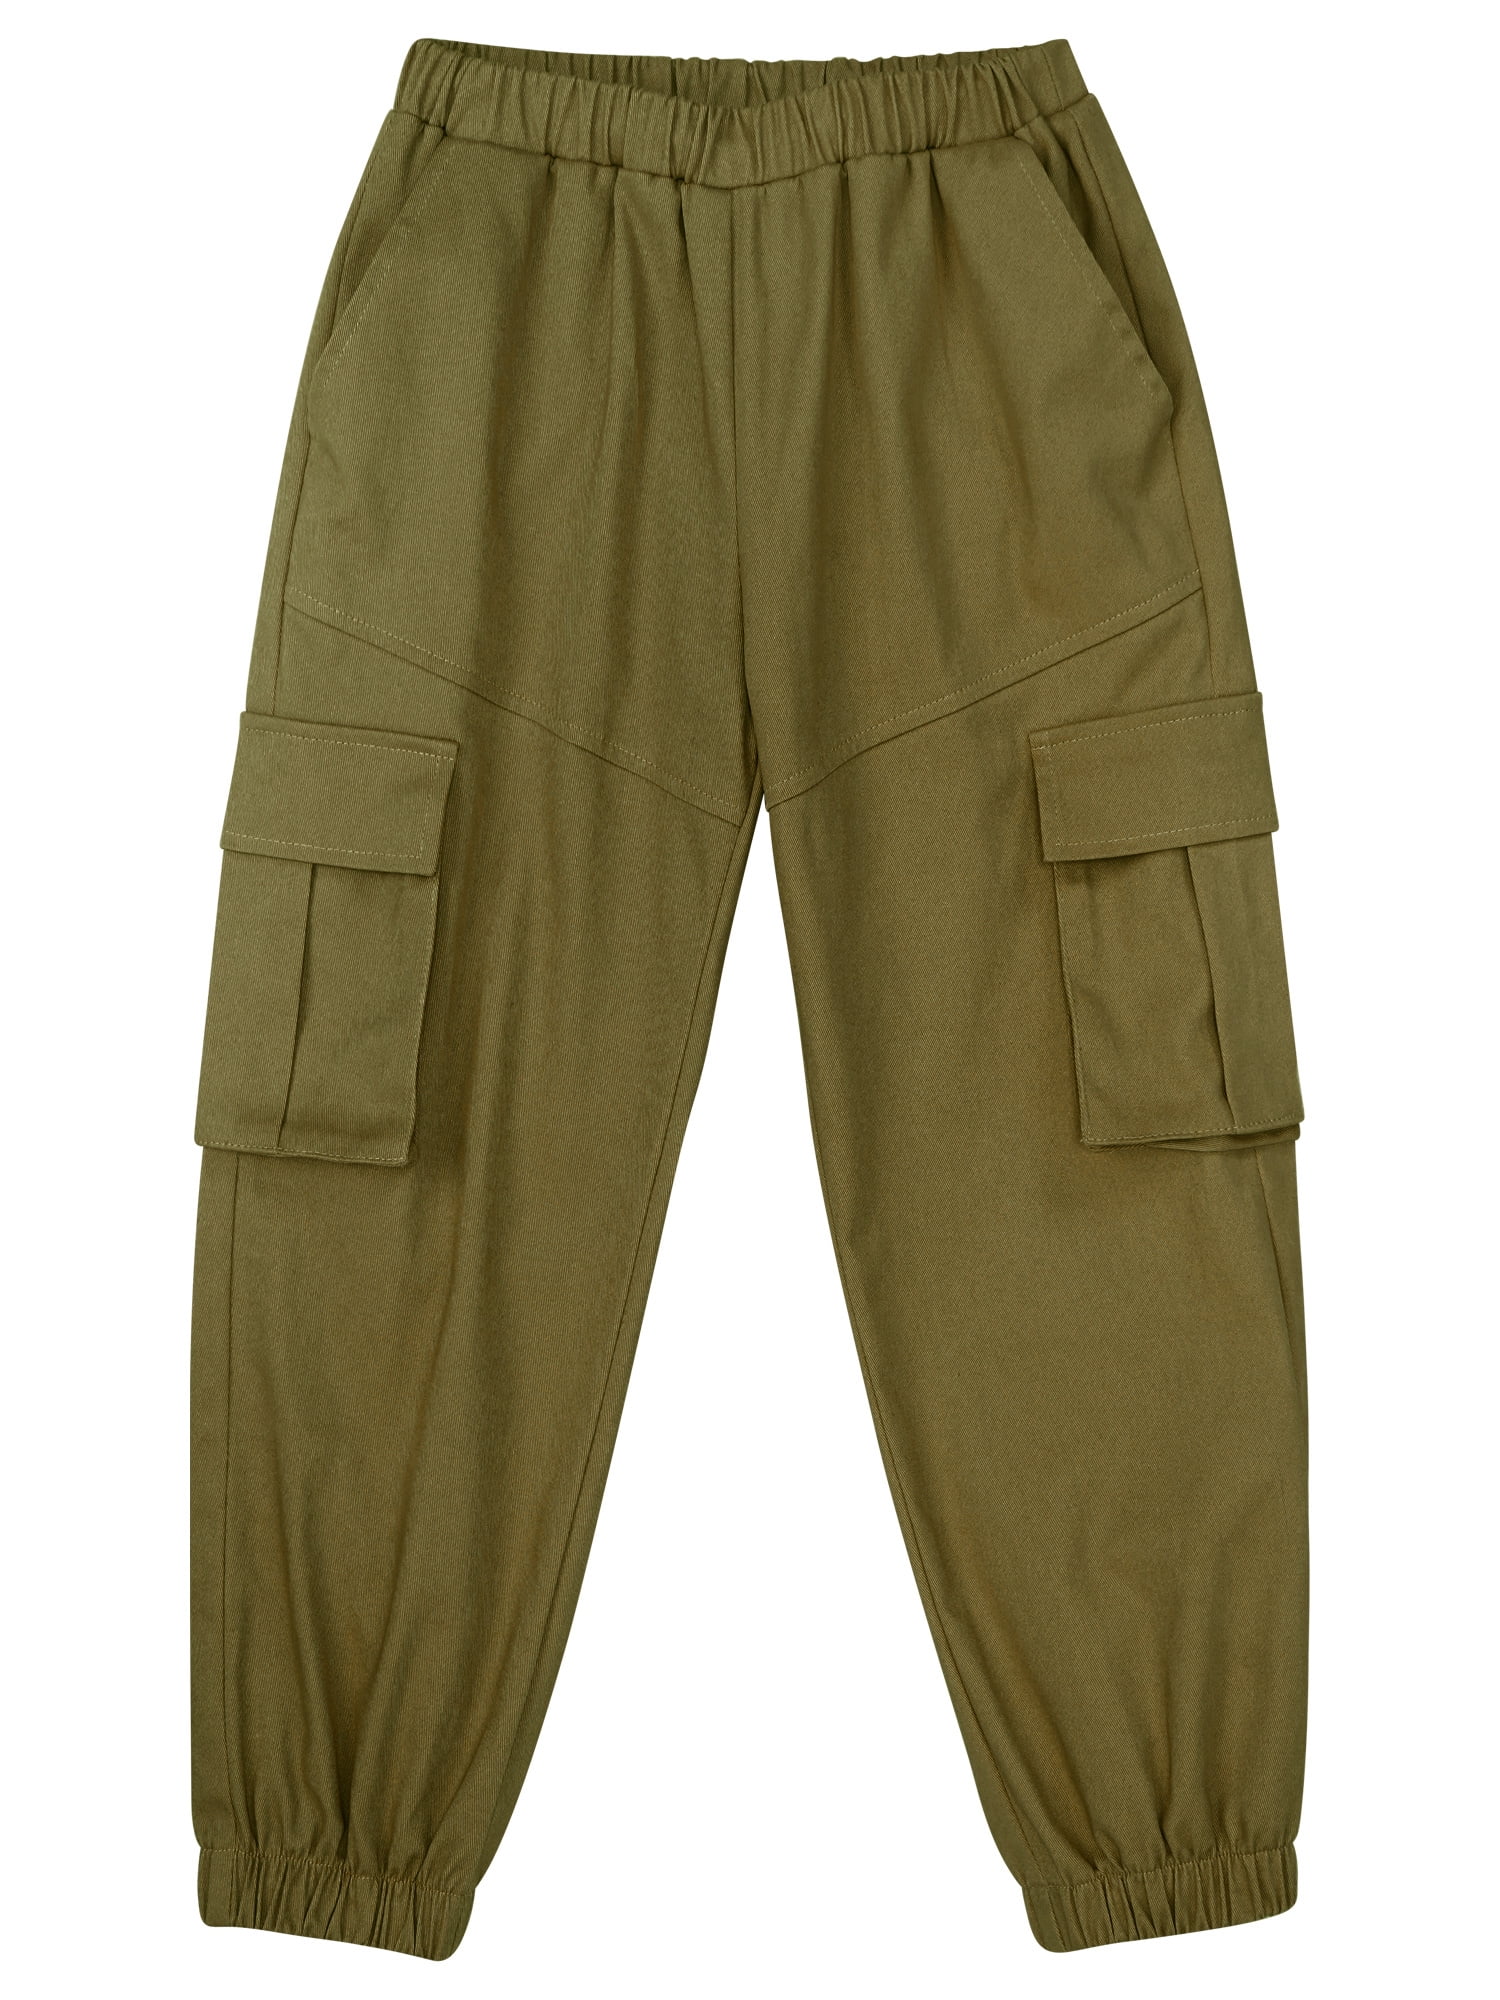 YiZYiF Kids Boys Moisture-Wicking Army Casual Dungarees Pants,Sizes Green Cargo 6-14 14